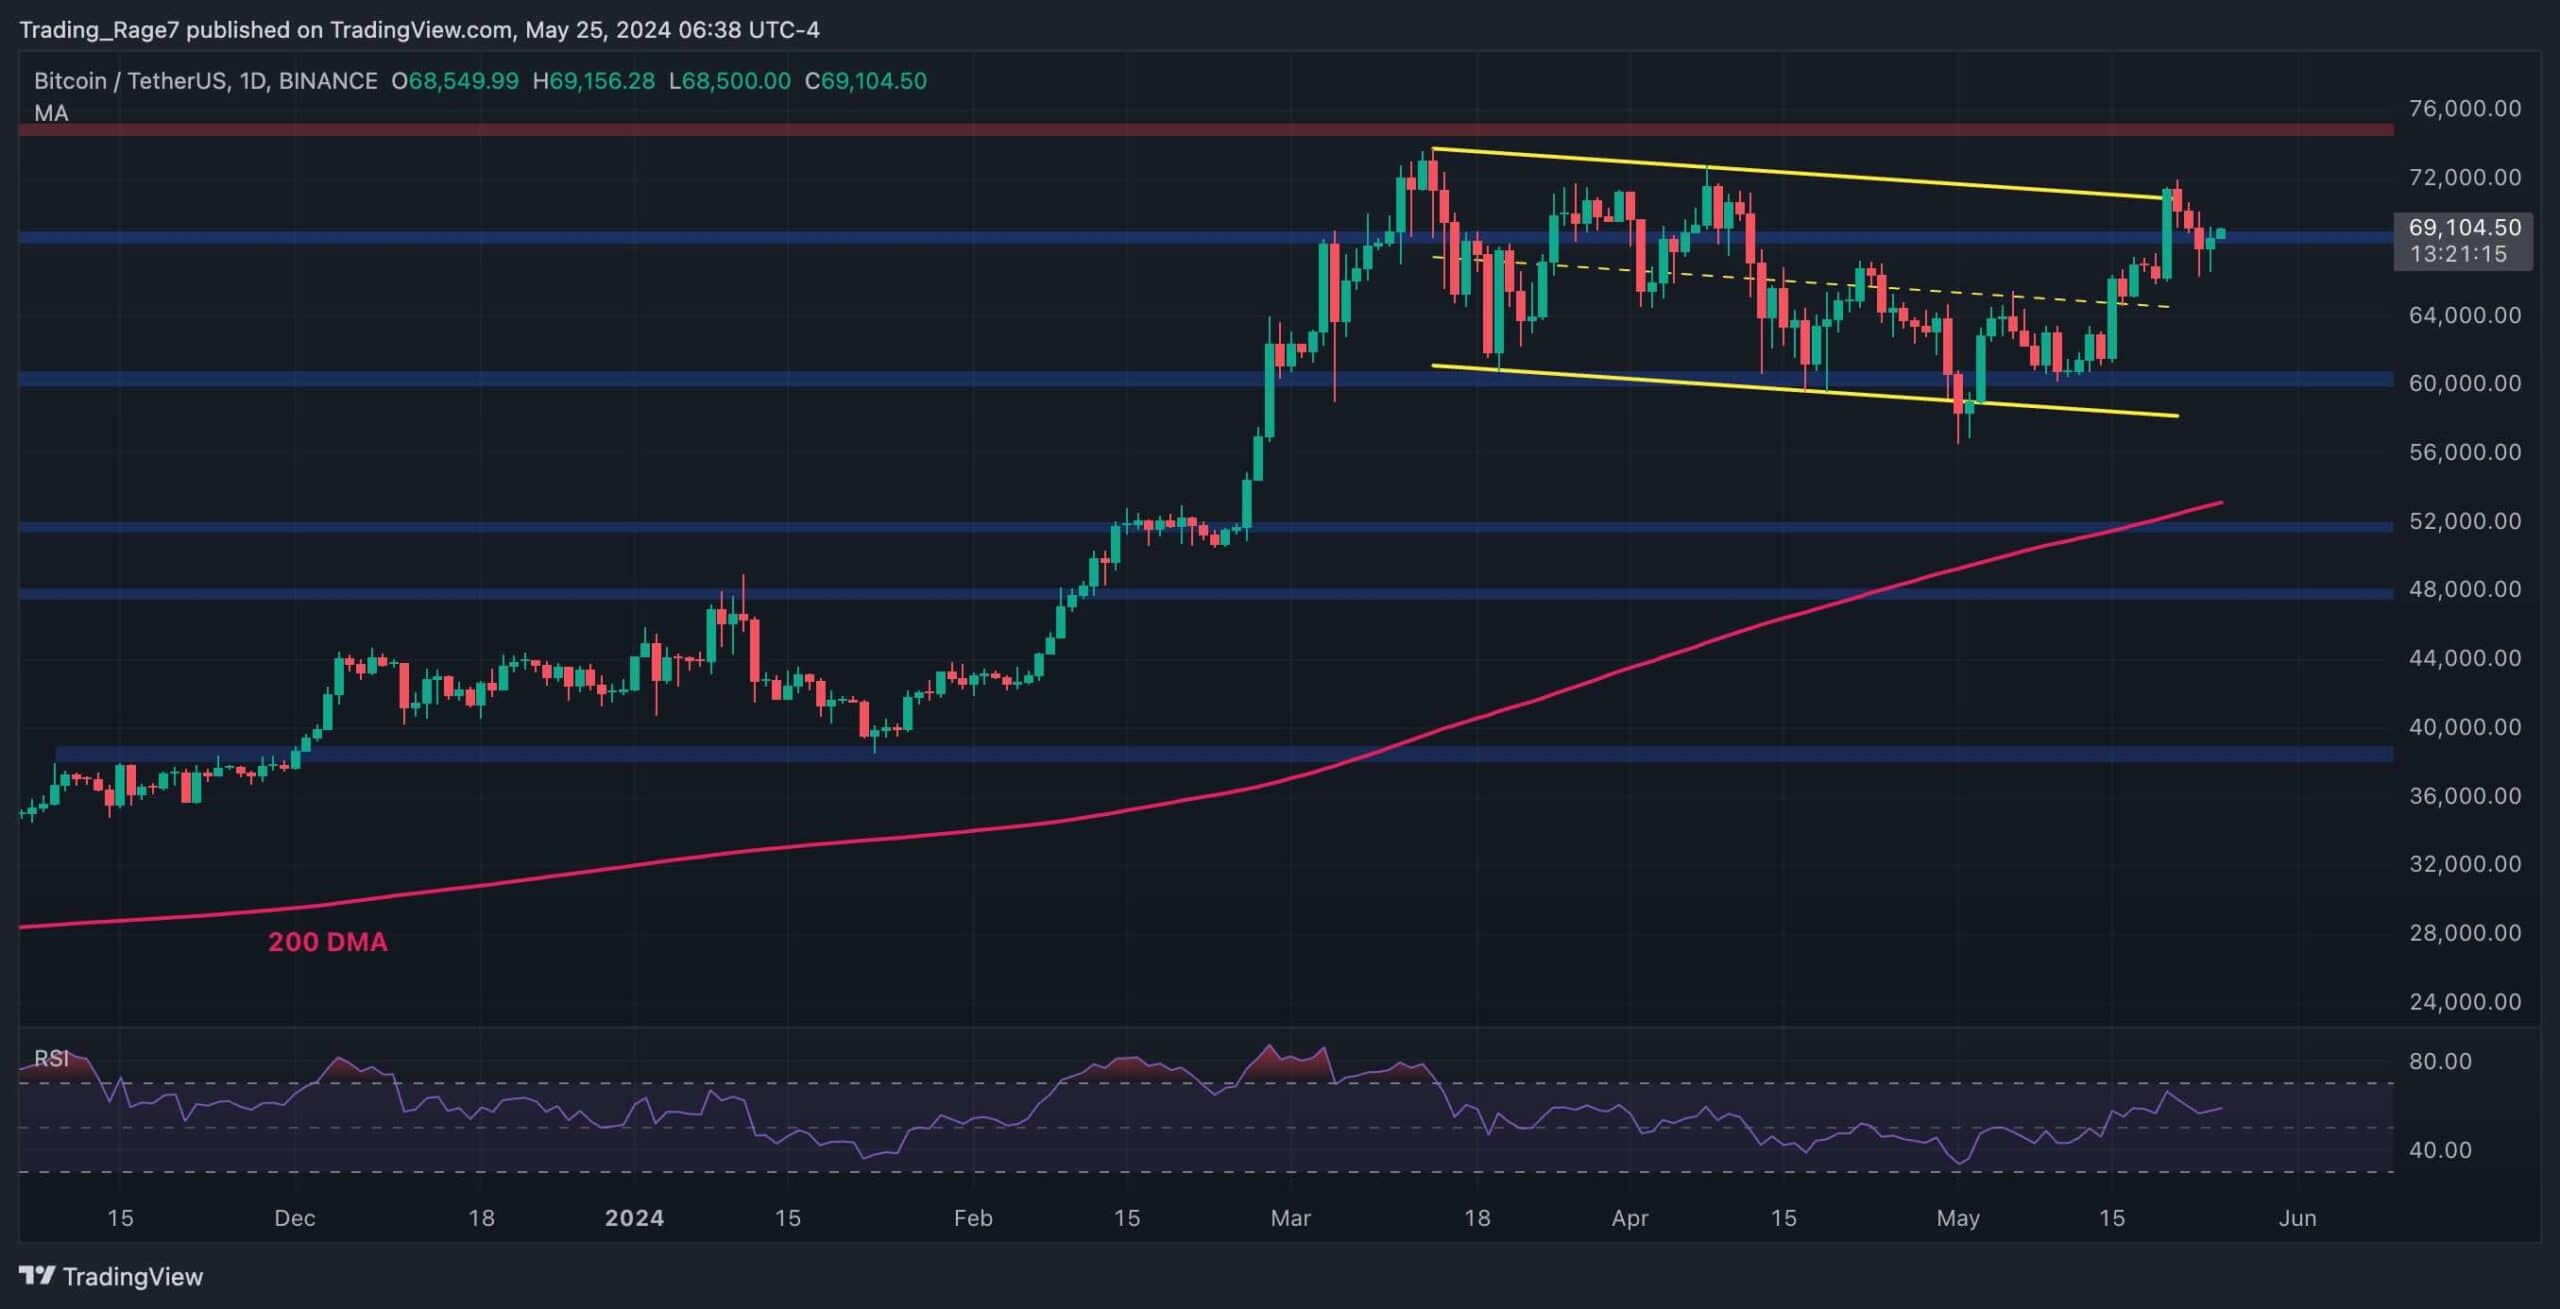 Btc-needs-to-hold-this-support-level-before-challenging-the-$73.8k-ath-(bitcoin-price-analysis)